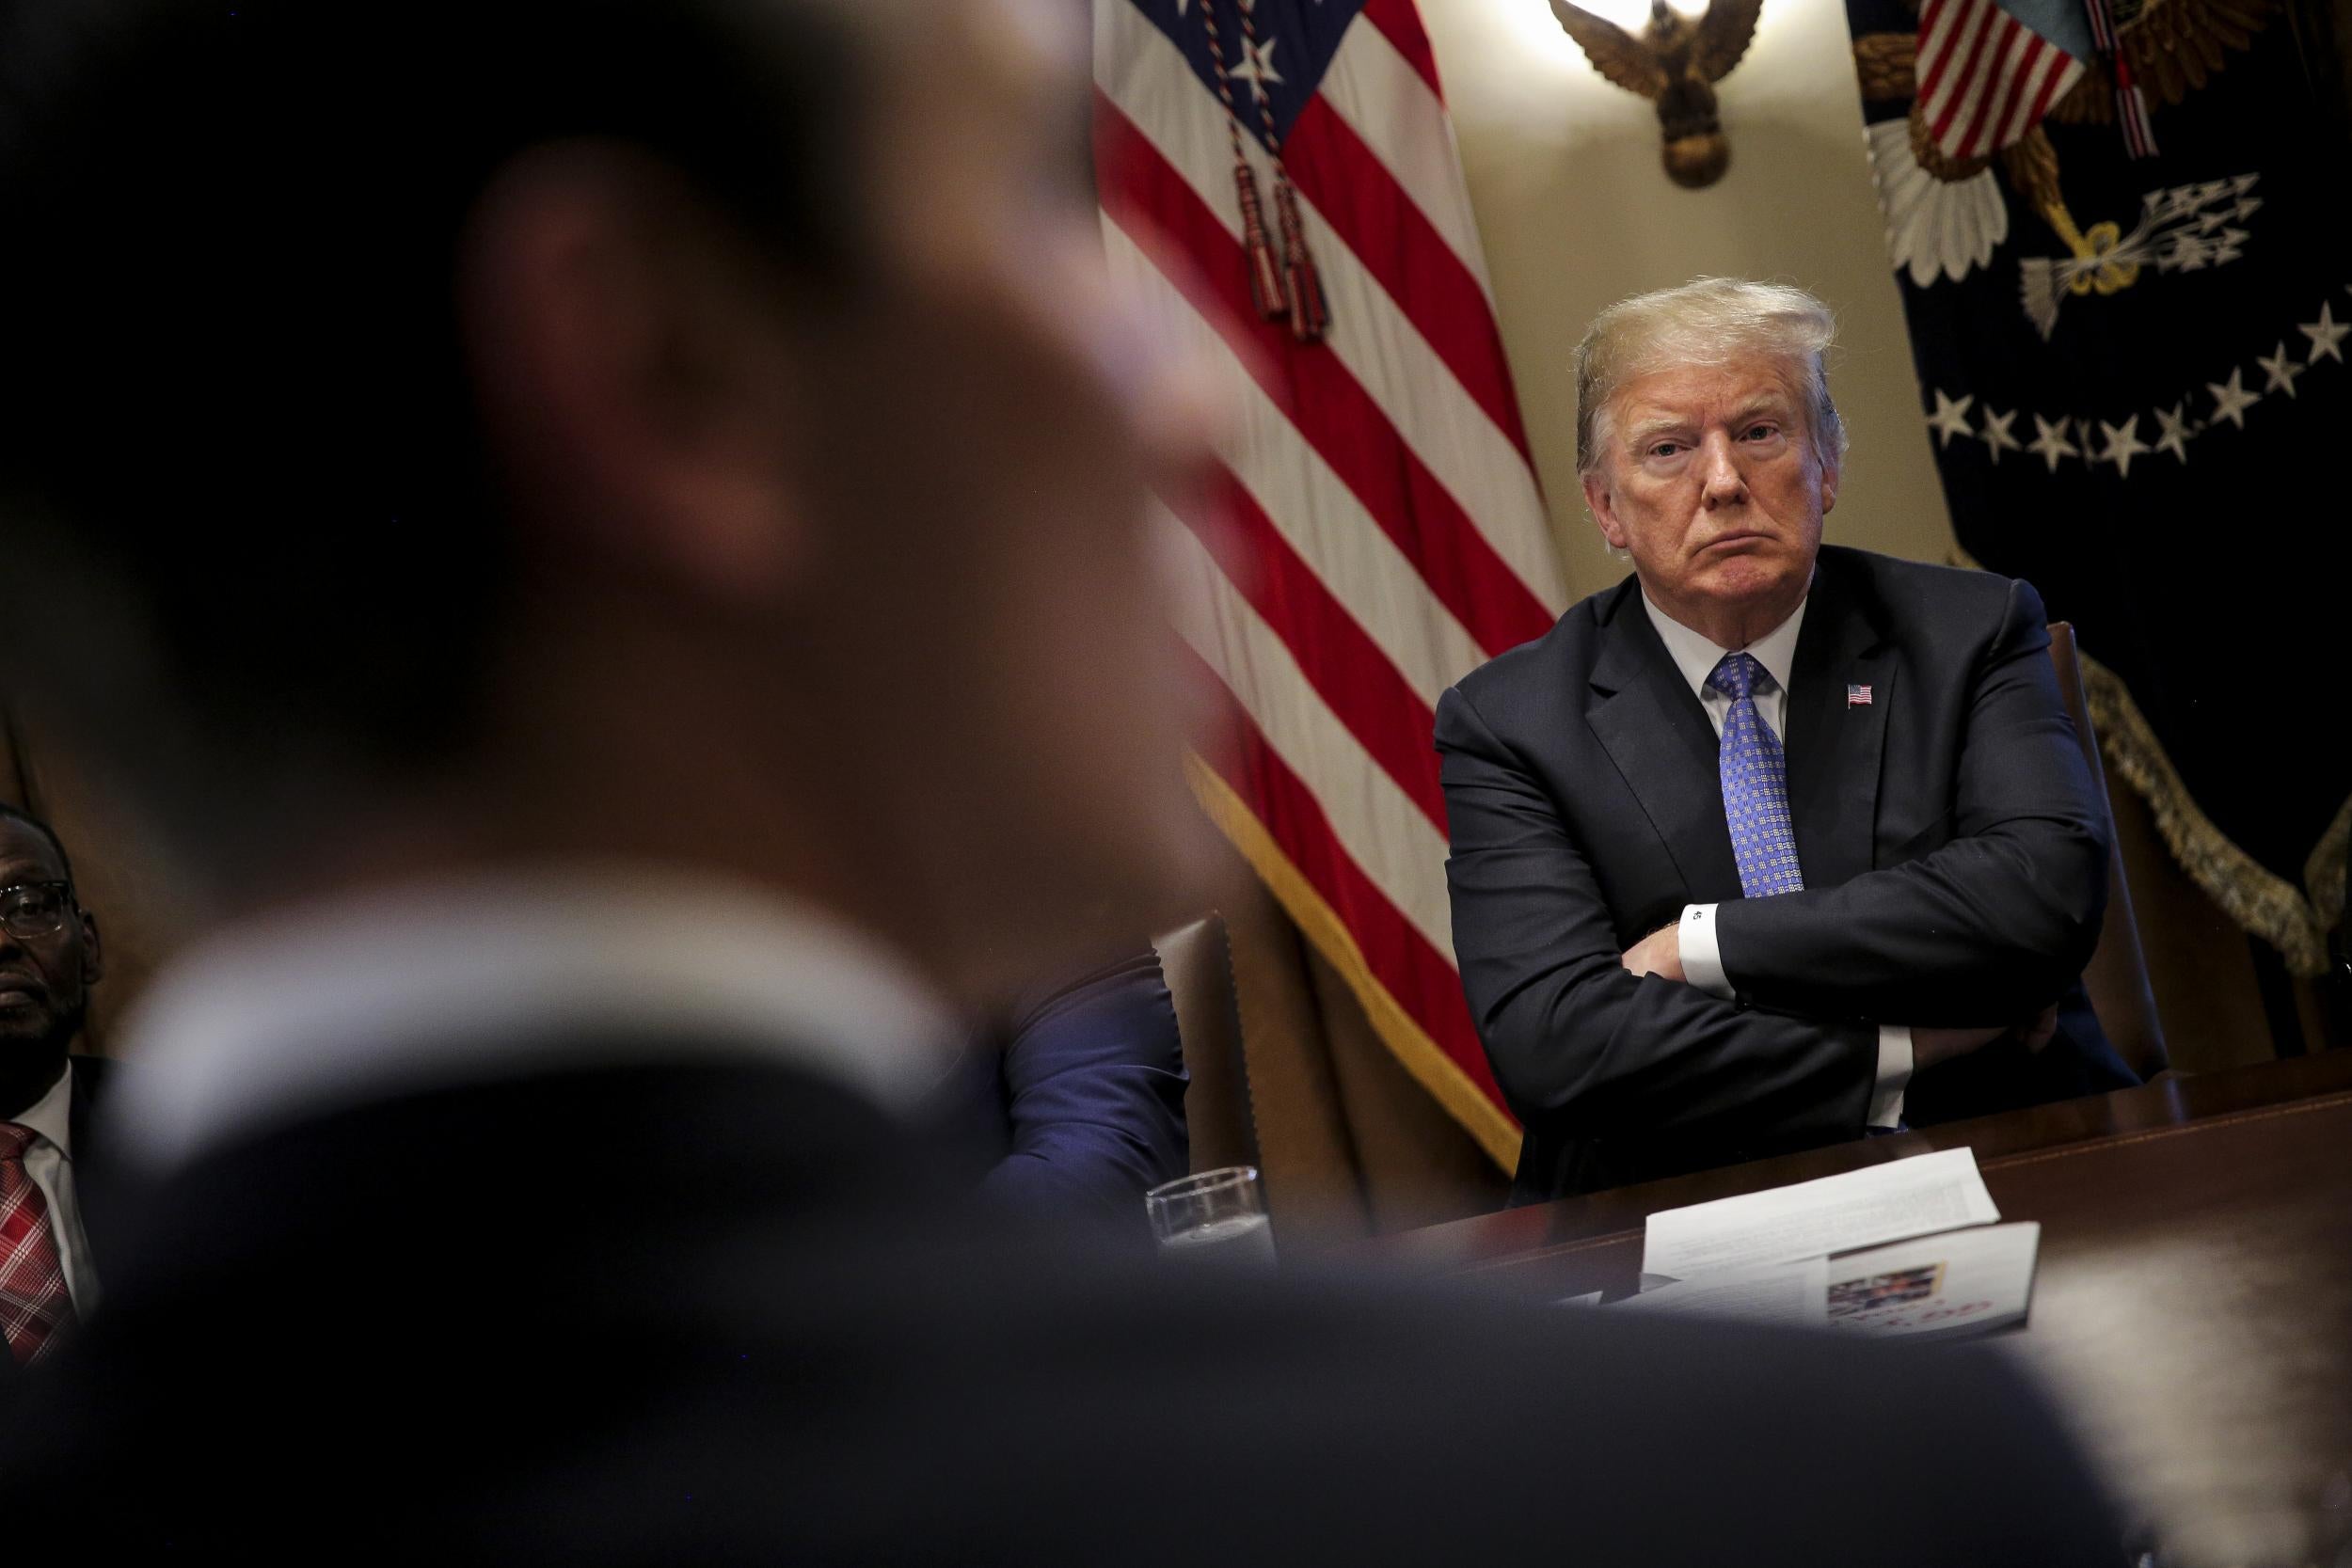 US President Donald Trump listens during a meeting at the White House in Washington